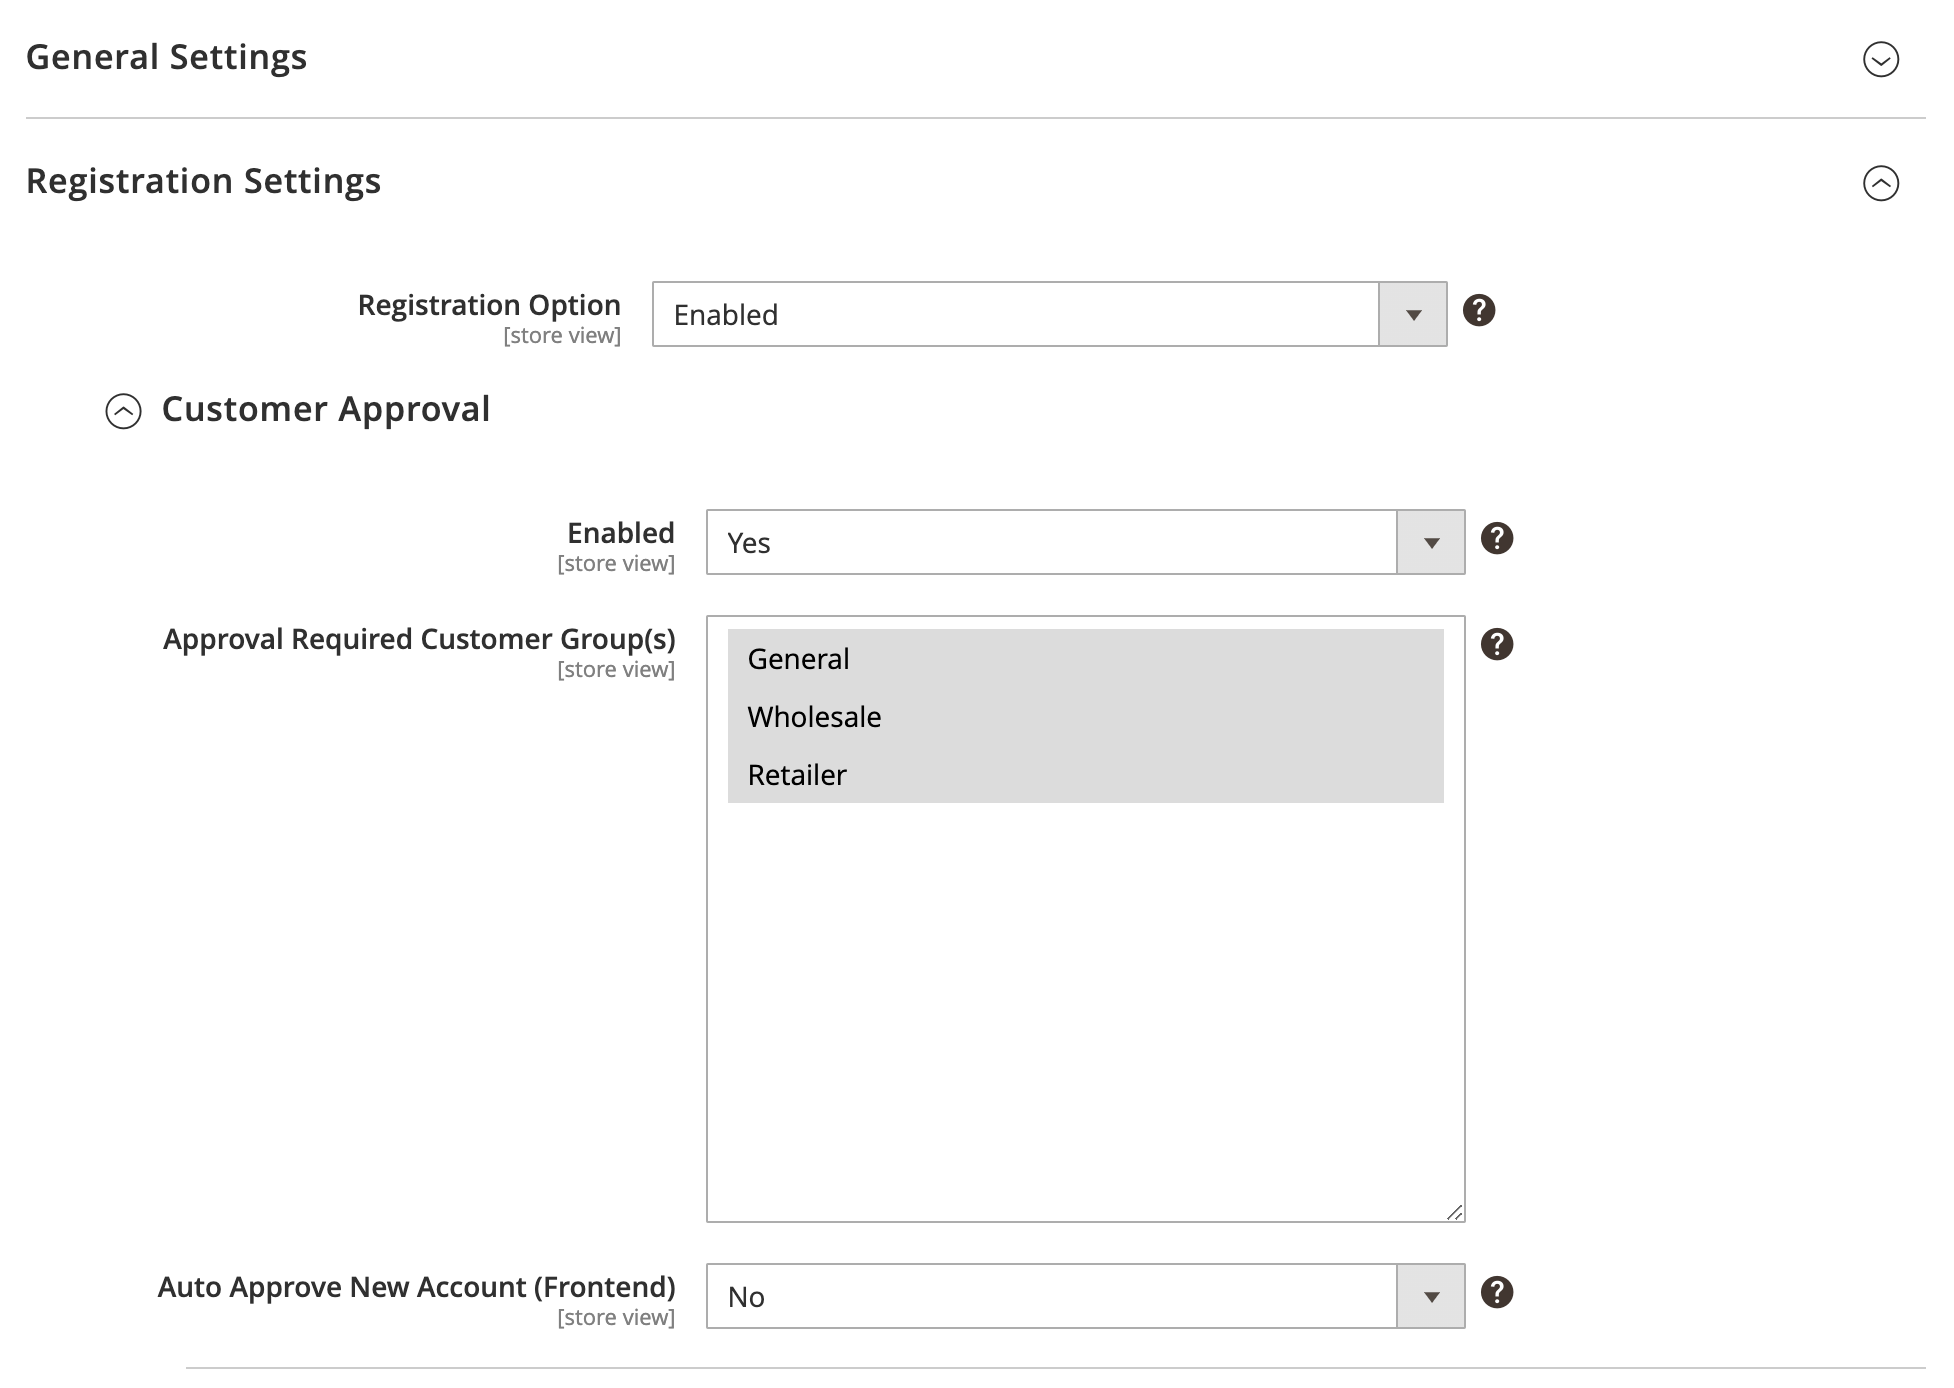 Require Customer Approval/Activation - General Setting